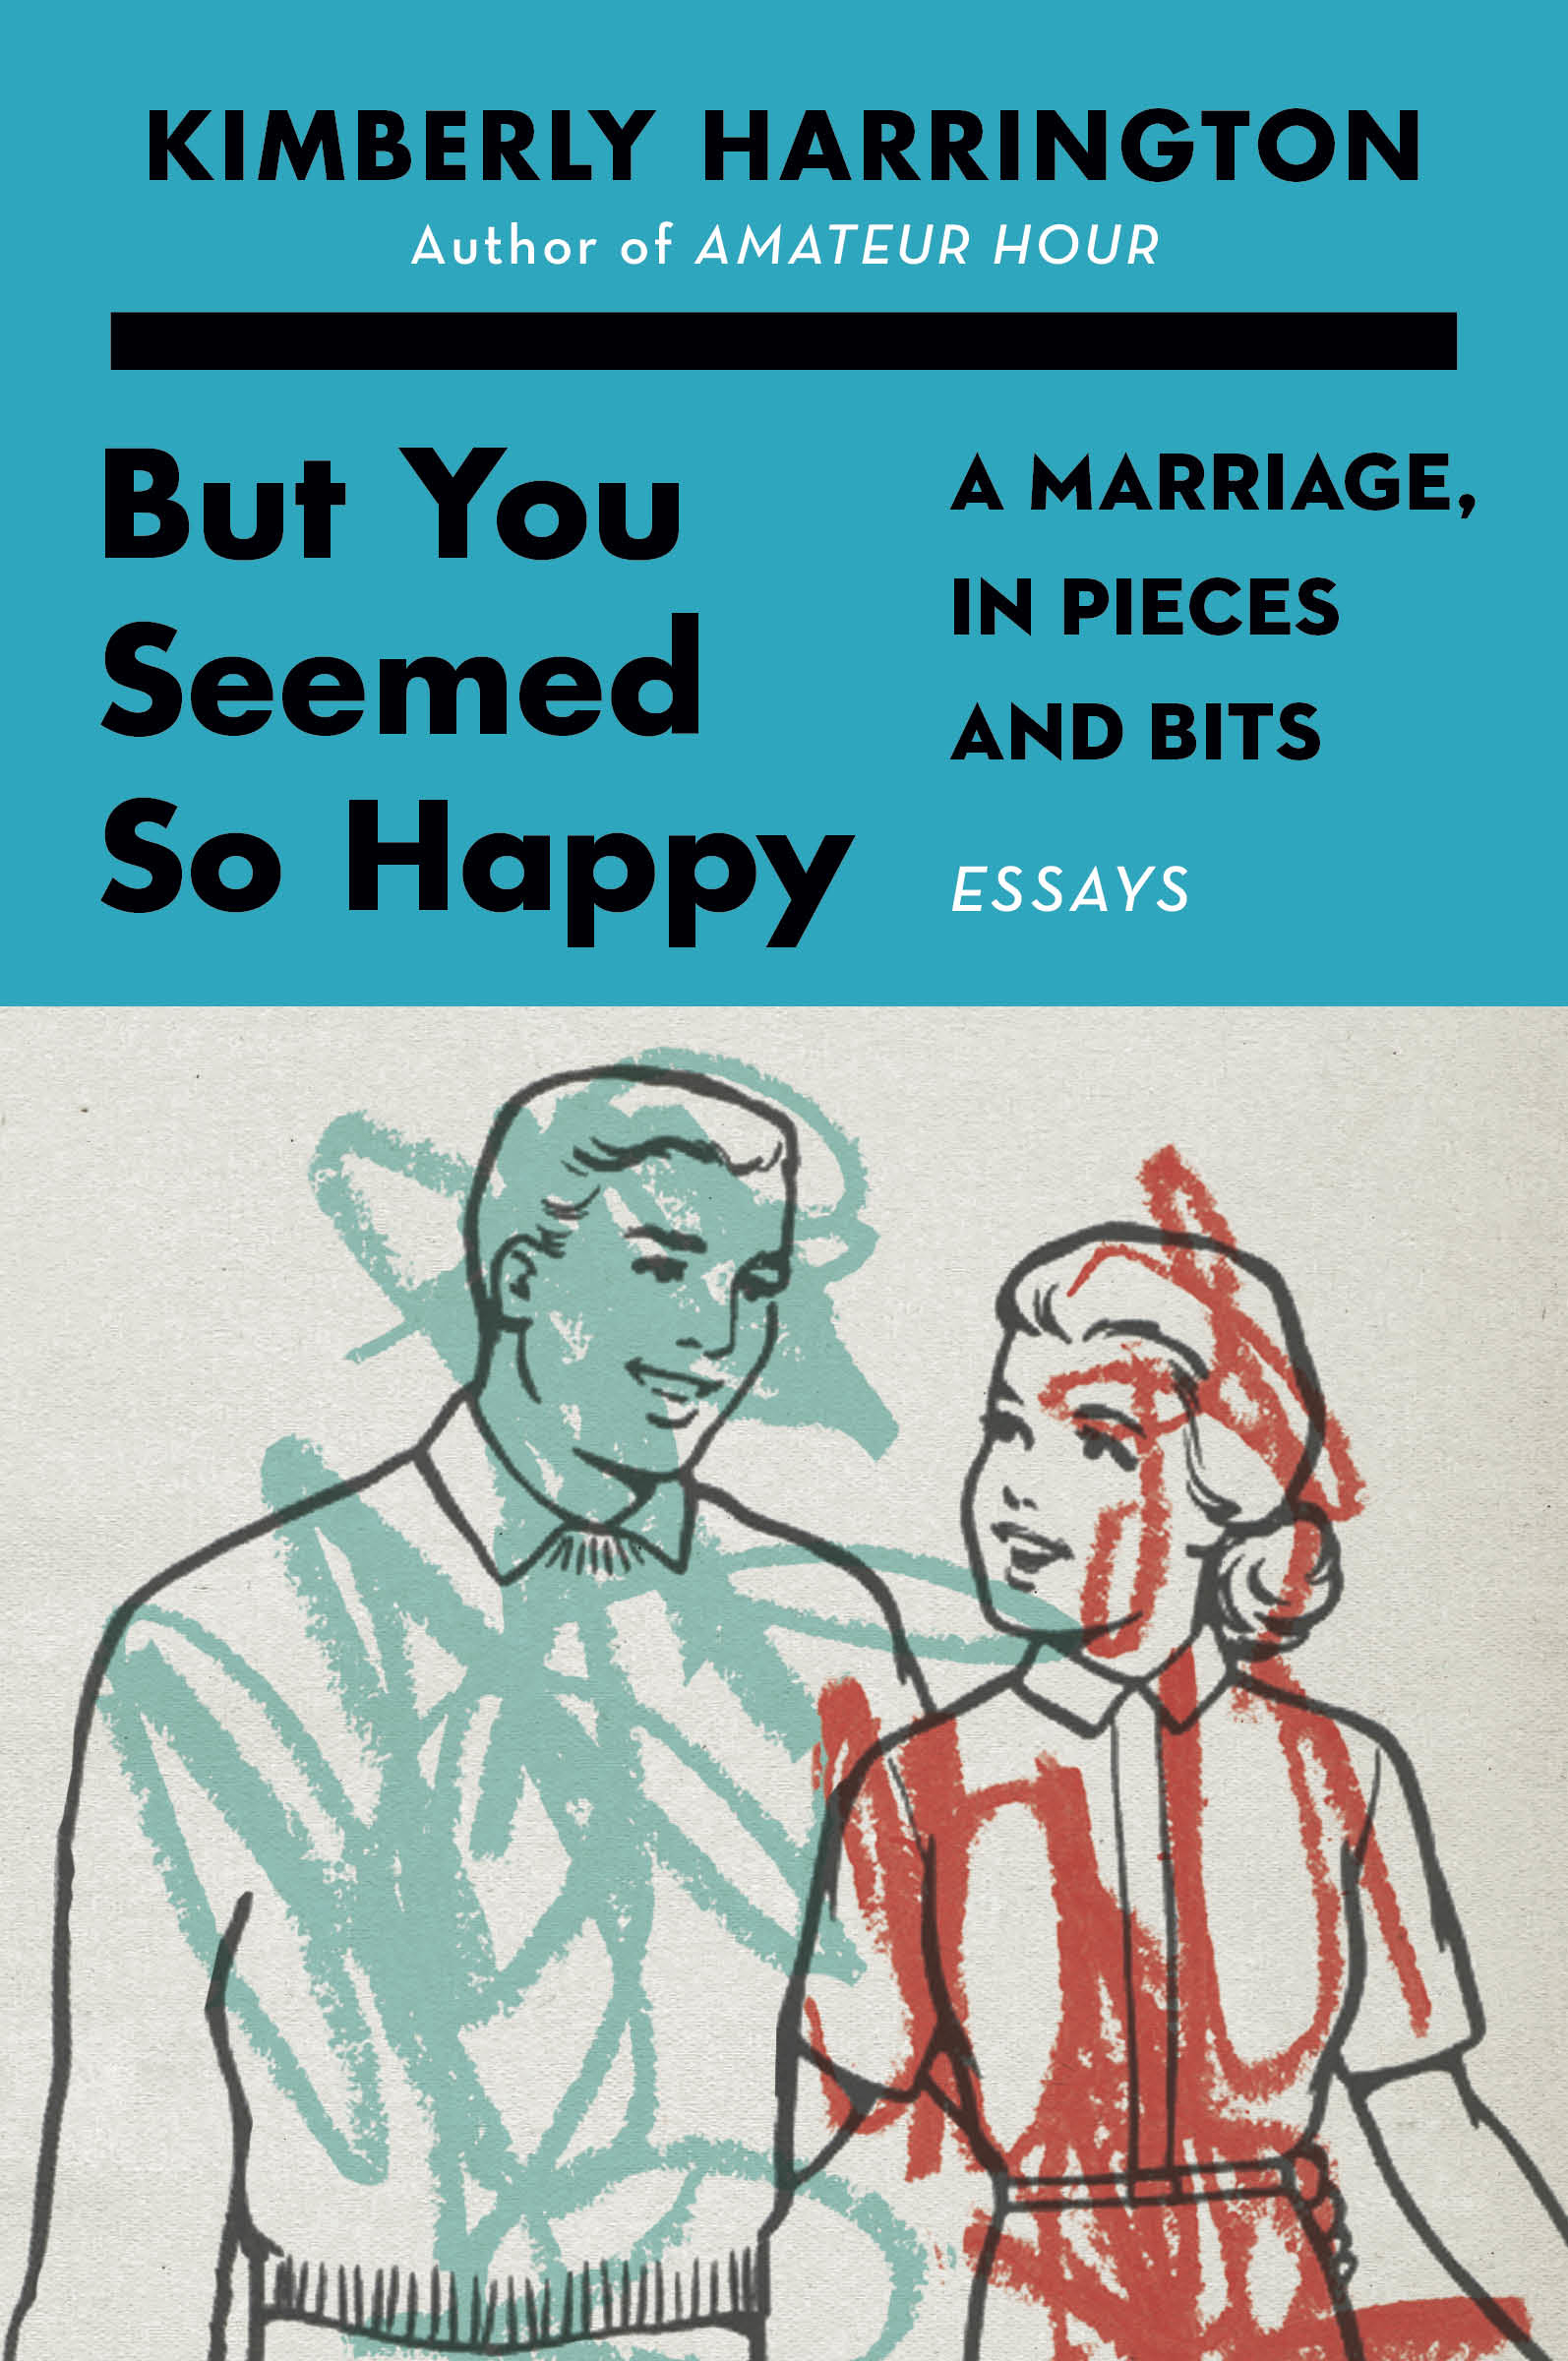 Book Launch: But You Seemed So Happy by Kimberly Harrington in conversation with Emily Flake